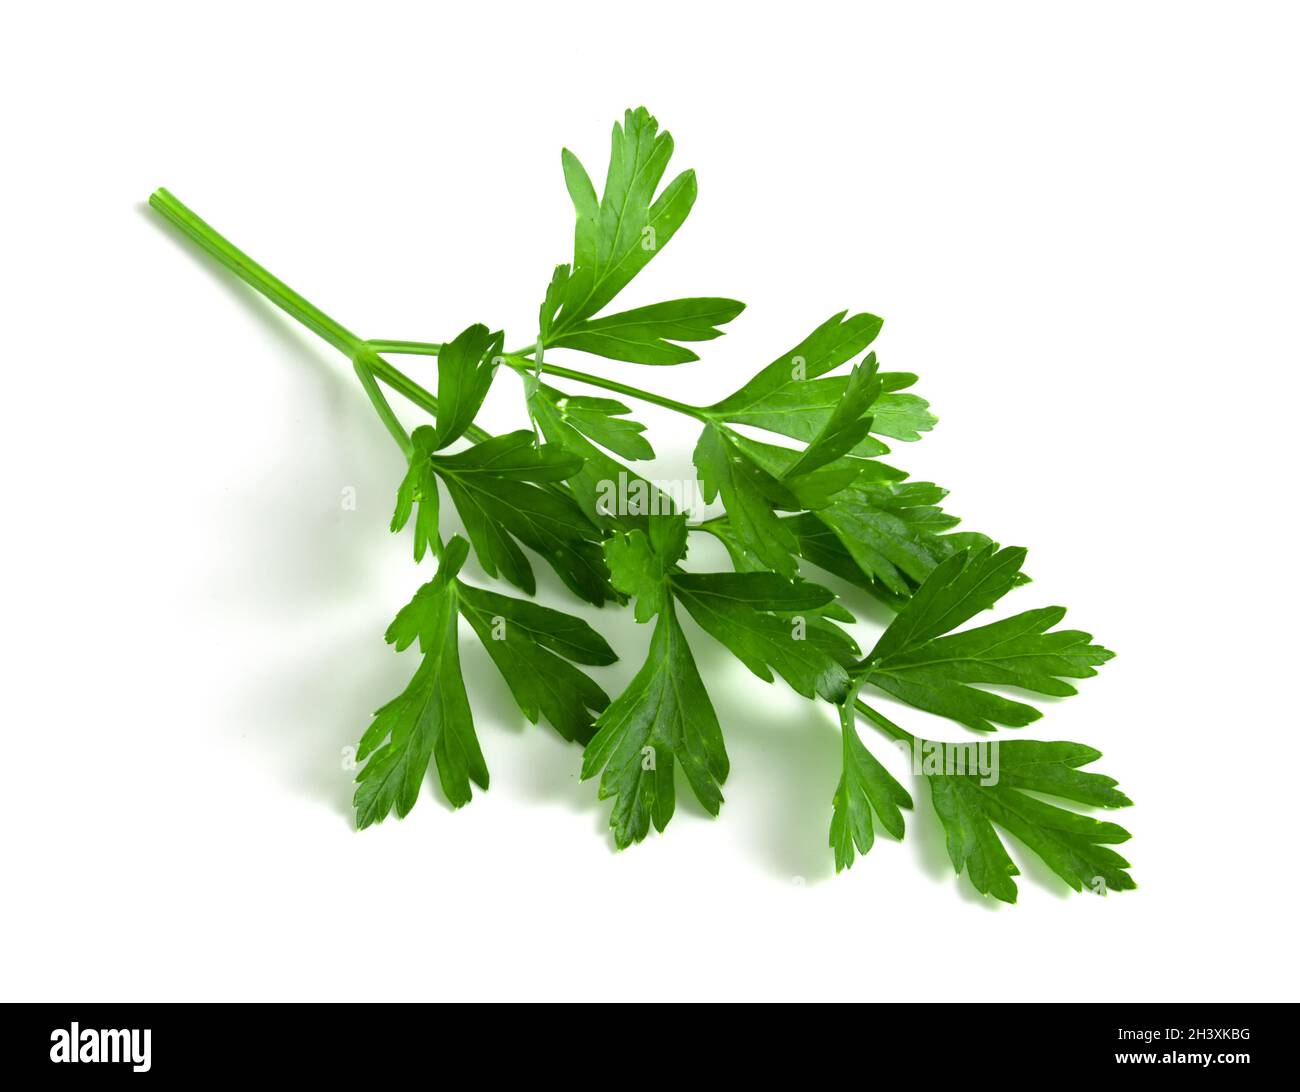 Parsley branch on a white background close-up Stock Photo